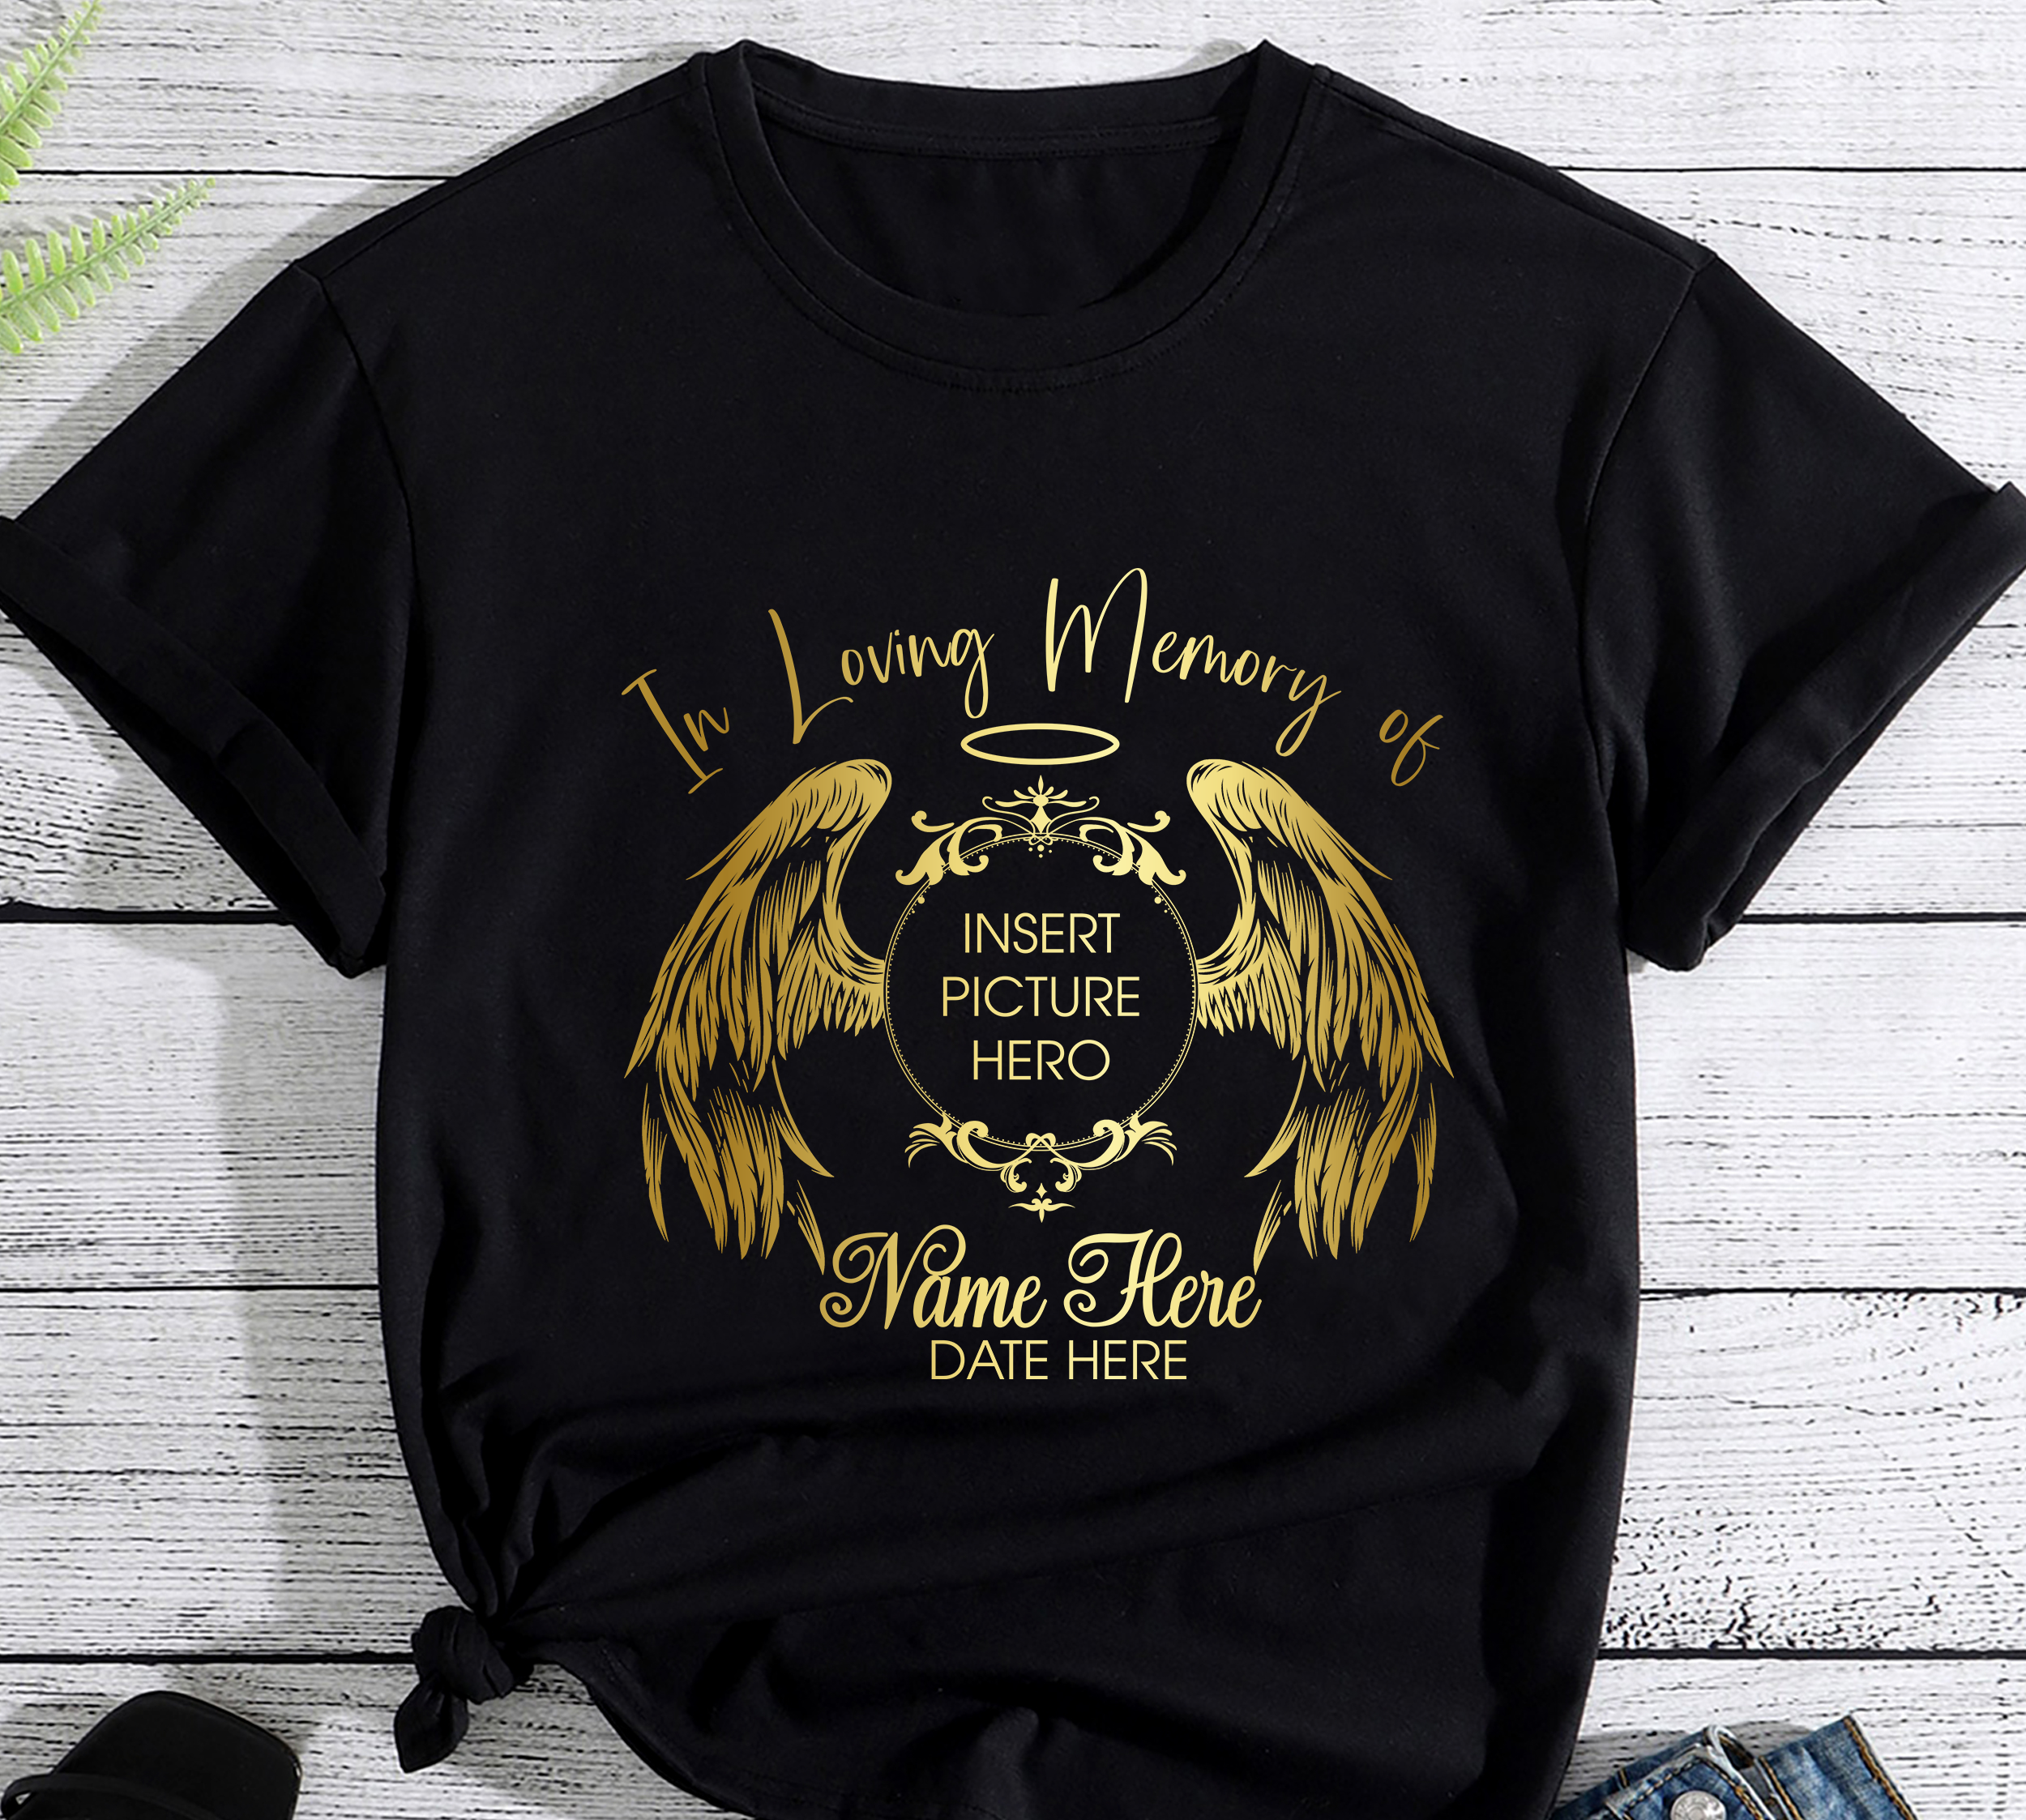 https://www.buytshirtdesigns.net/wp-content/uploads/2023/03/In-Loving-Memory-T-Shirt-R.I.P.-Shirt-Rest-in-Peace-Shirt-Custom-Funeral-Shirt-Picture-Shirt-Personalized-Memorial-T-Shirt-RIP-Tee-mk.png